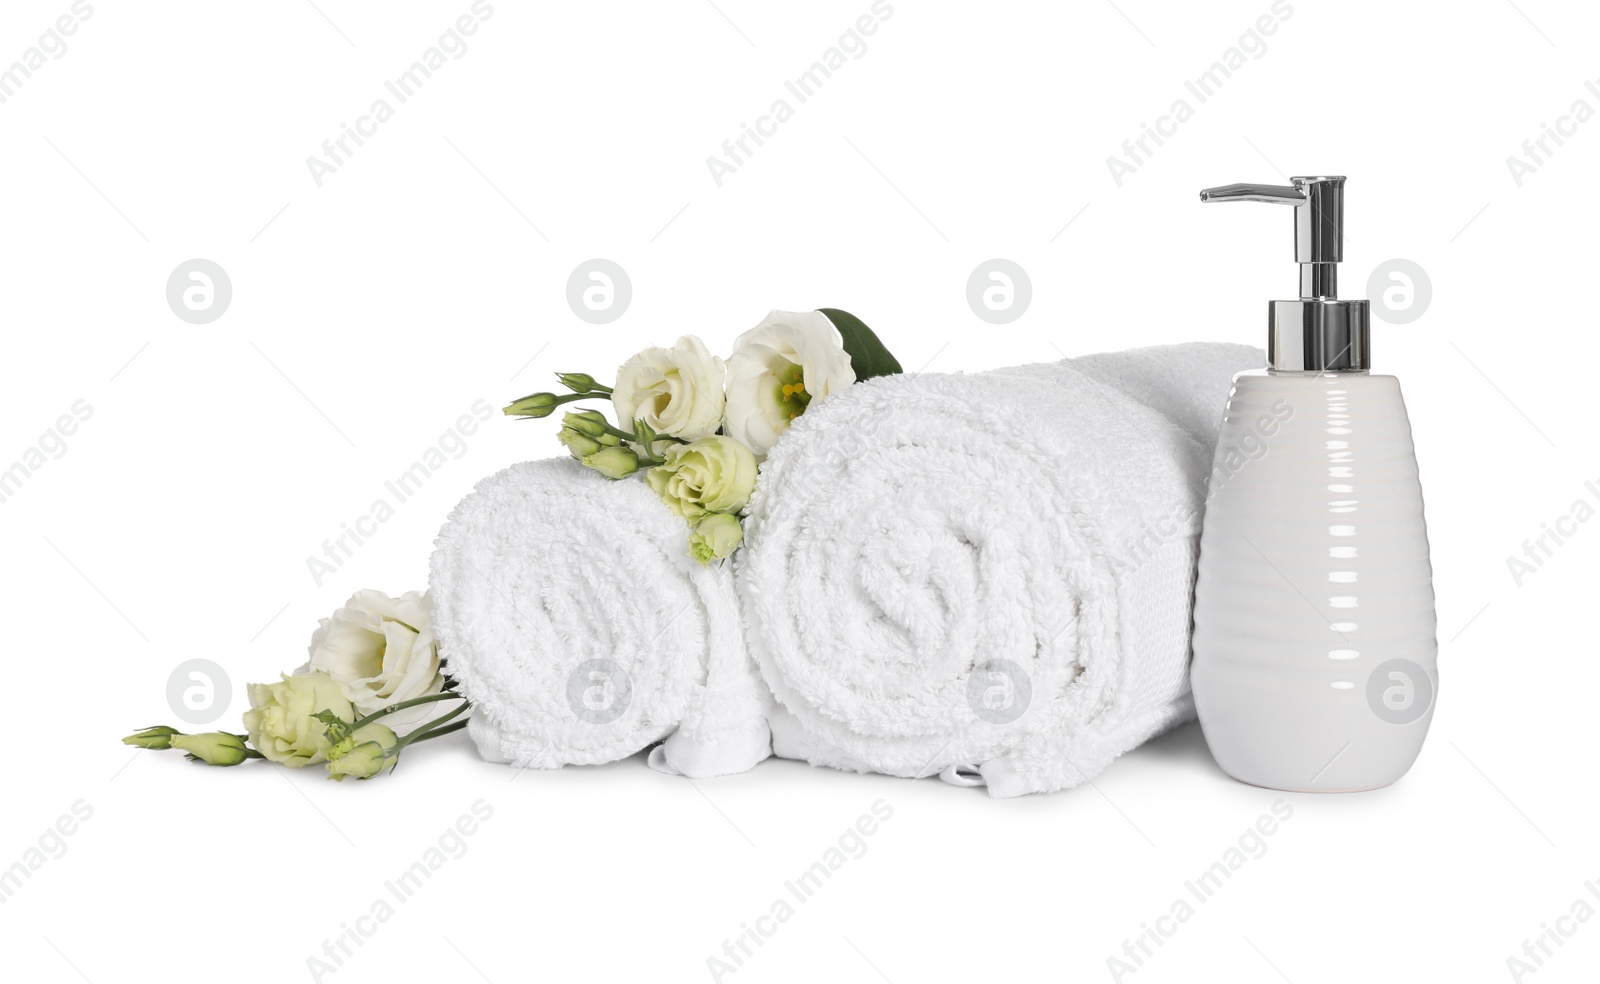 Photo of Clean soft towels with flowers and soap dispenser isolated on white